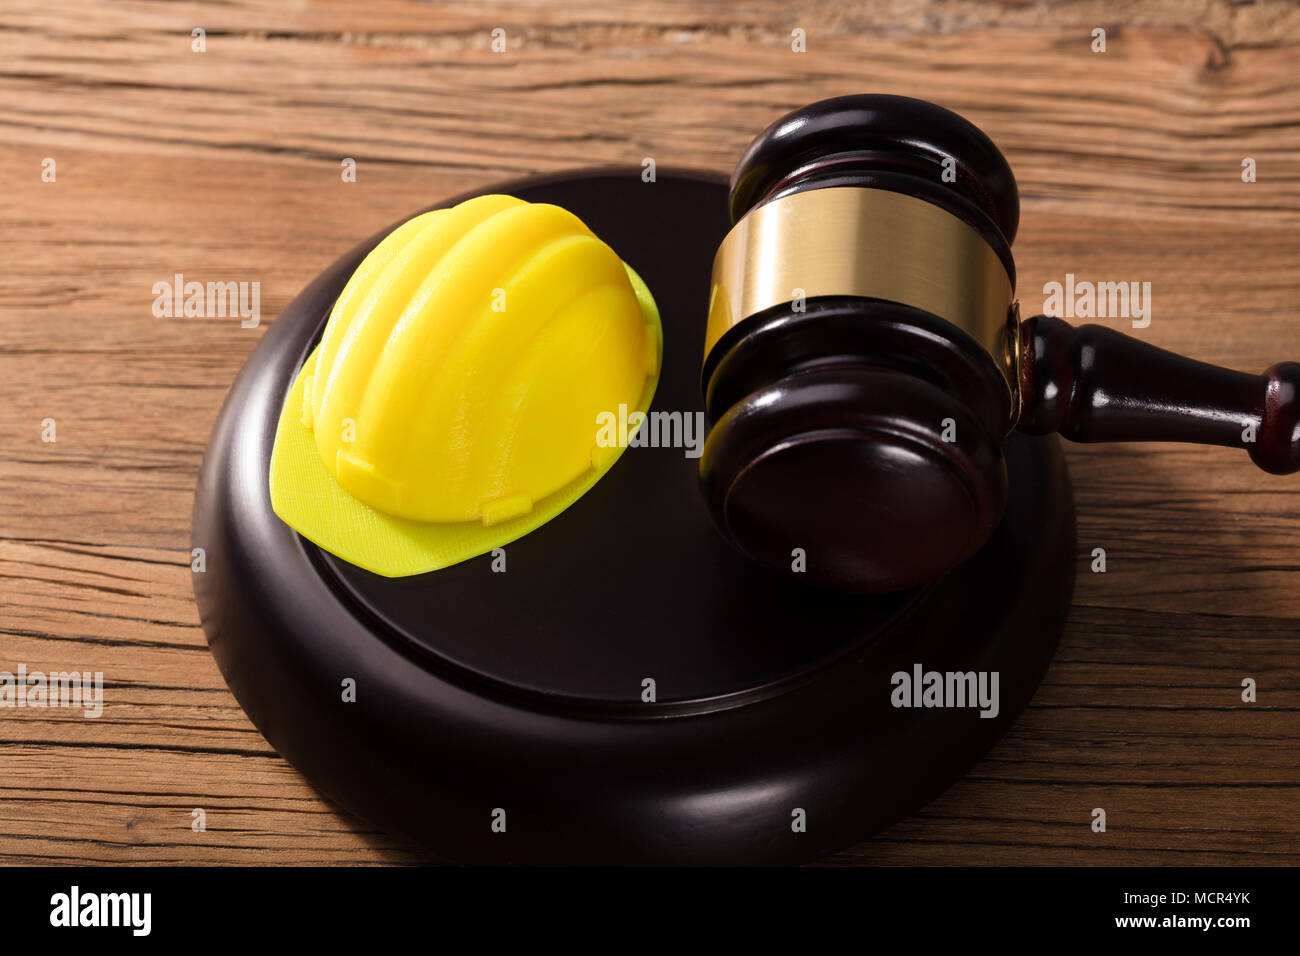 High Angle View Of Yellow Hard Hat And Gavel On Wooden Desk Stock Photo